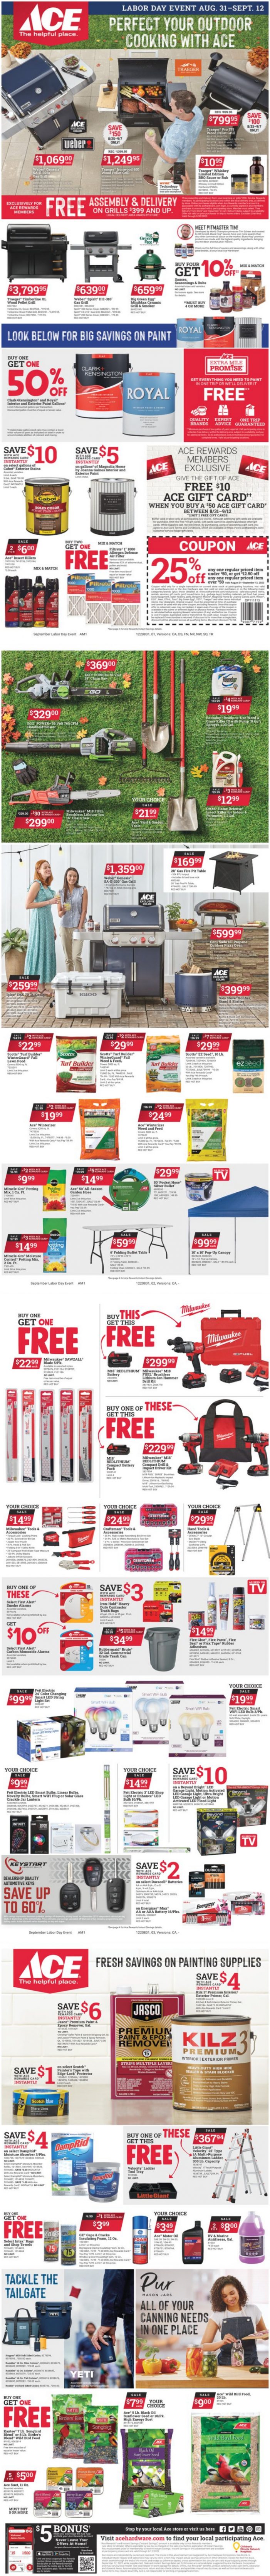 Your Sender’s Market Ace Hardware Labor Day Event!